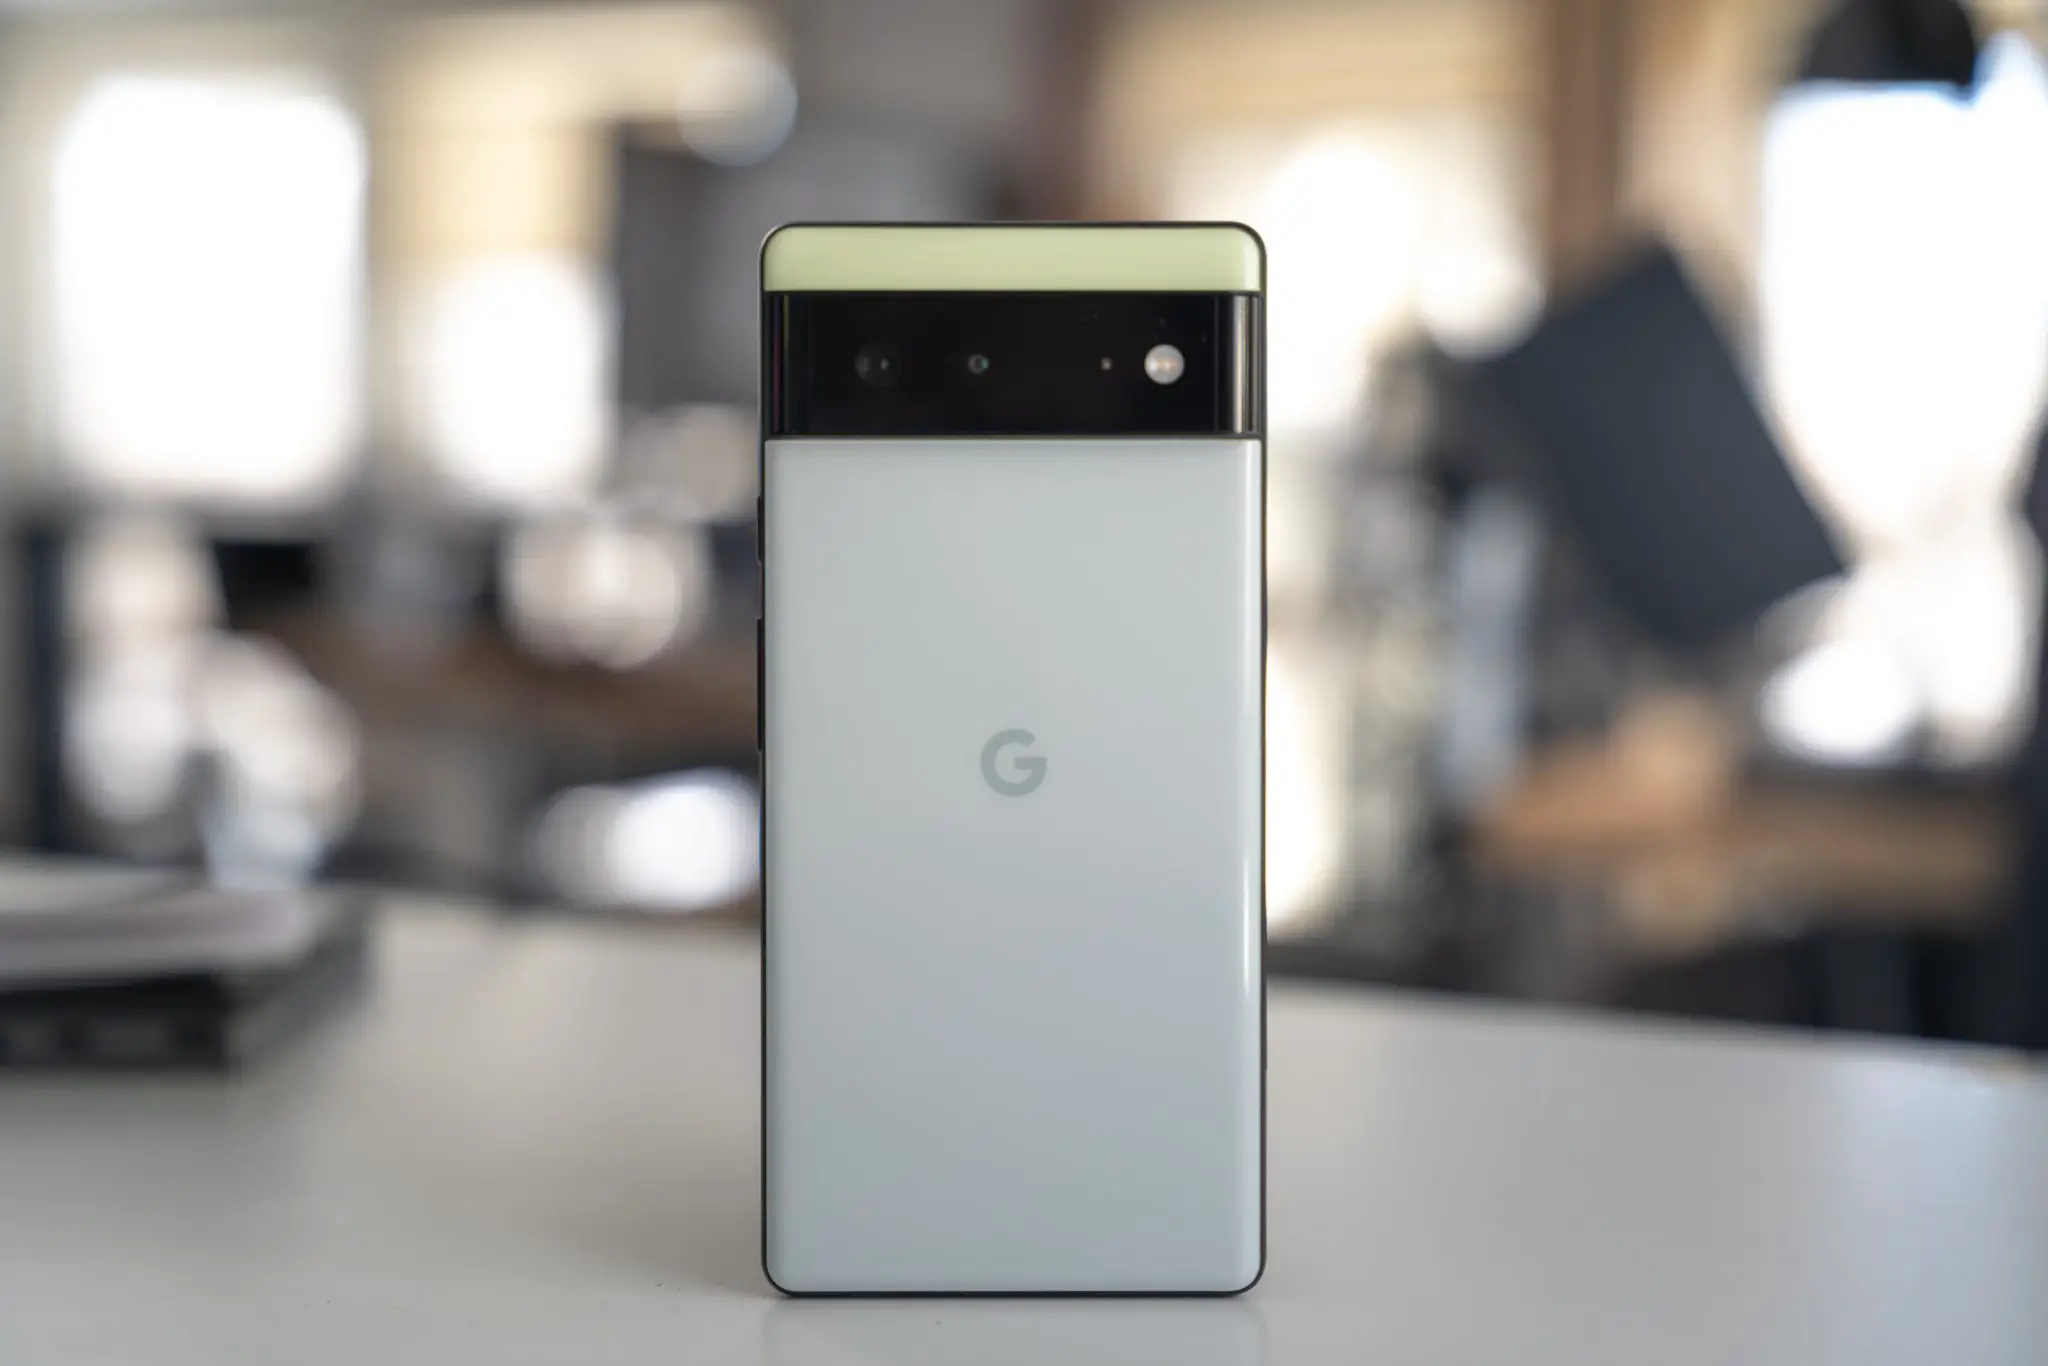 Google's March Update for Pixel 6 lineup includes a slew of new